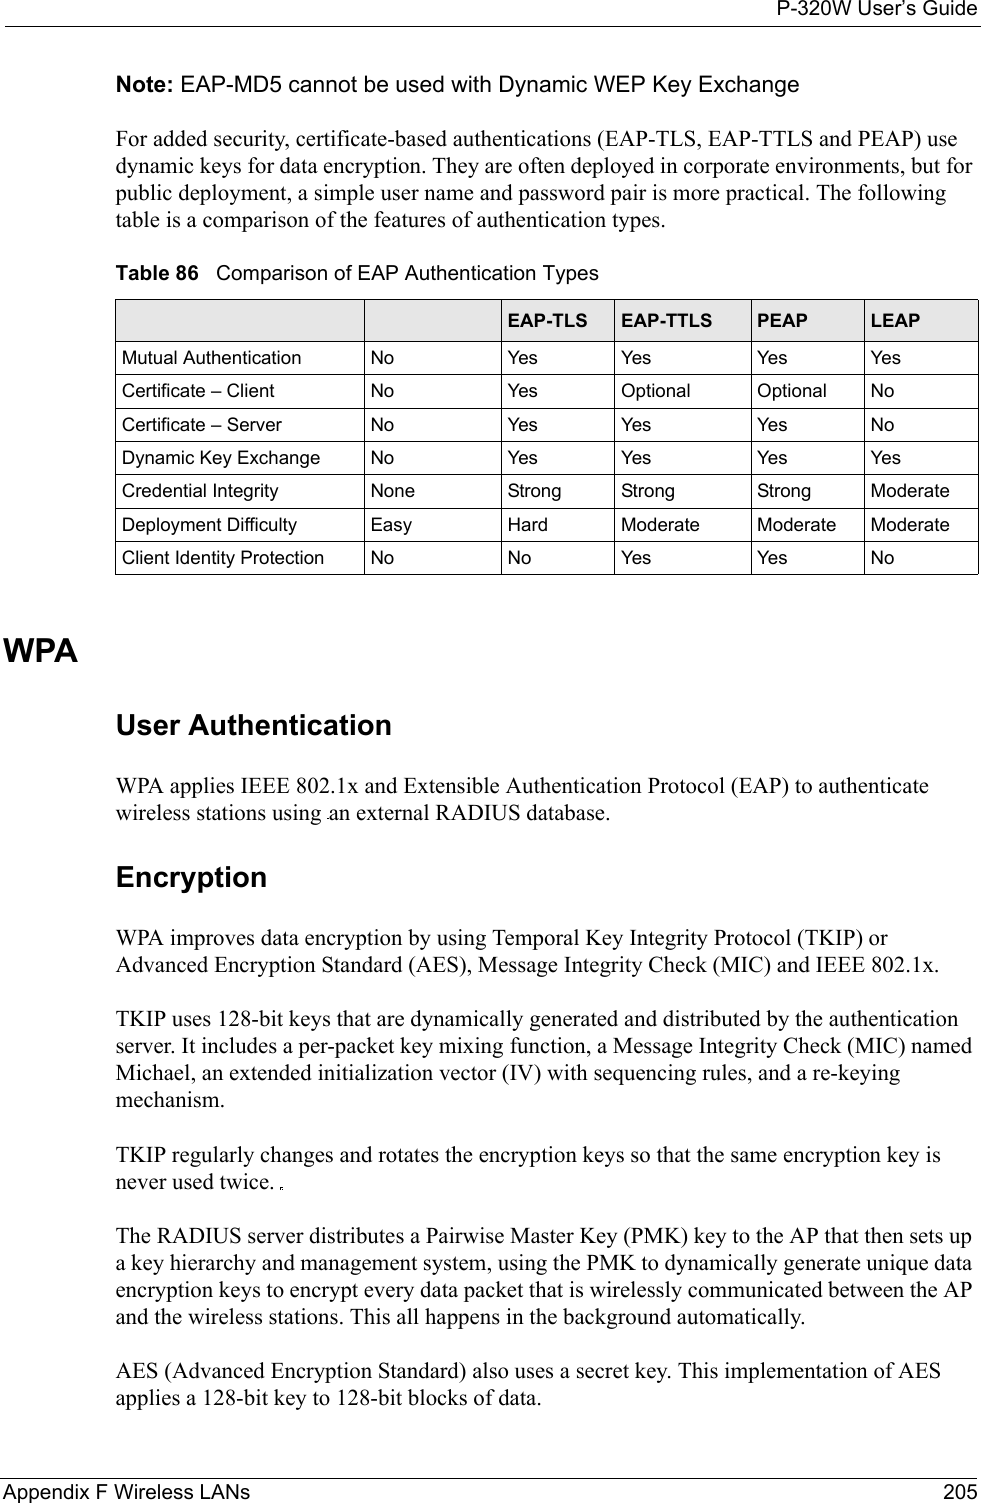 P-320W User’s GuideAppendix F Wireless LANs 205Note: EAP-MD5 cannot be used with Dynamic WEP Key ExchangeFor added security, certificate-based authentications (EAP-TLS, EAP-TTLS and PEAP) use dynamic keys for data encryption. They are often deployed in corporate environments, but for public deployment, a simple user name and password pair is more practical. The following table is a comparison of the features of authentication types.Table 86   Comparison of EAP Authentication TypesEAP-MD5 EAP-TLS EAP-TTLS PEAP LEAPMutual Authentication No Yes Yes Yes YesCertificate – Client No Yes Optional Optional NoCertificate – Server No Yes Yes Yes NoDynamic Key Exchange No Yes Yes Yes YesCredential Integrity None Strong Strong Strong ModerateDeployment Difficulty Easy Hard Moderate Moderate ModerateClient Identity Protection No No Yes Yes NoWPAUser Authentication WPA applies IEEE 802.1x and Extensible Authentication Protocol (EAP) to authenticate wireless stations using an external RADIUS database. Encryption WPA improves data encryption by using Temporal Key Integrity Protocol (TKIP) or Advanced Encryption Standard (AES), Message Integrity Check (MIC) and IEEE 802.1x. TKIP uses 128-bit keys that are dynamically generated and distributed by the authentication server. It includes a per-packet key mixing function, a Message Integrity Check (MIC) named Michael, an extended initialization vector (IV) with sequencing rules, and a re-keying mechanism.TKIP regularly changes and rotates the encryption keys so that the same encryption key is never used twice. The RADIUS server distributes a Pairwise Master Key (PMK) key to the AP that then sets up a key hierarchy and management system, using the PMK to dynamically generate unique data encryption keys to encrypt every data packet that is wirelessly communicated between the AP and the wireless stations. This all happens in the background automatically.AES (Advanced Encryption Standard) also uses a secret key. This implementation of AES applies a 128-bit key to 128-bit blocks of data.